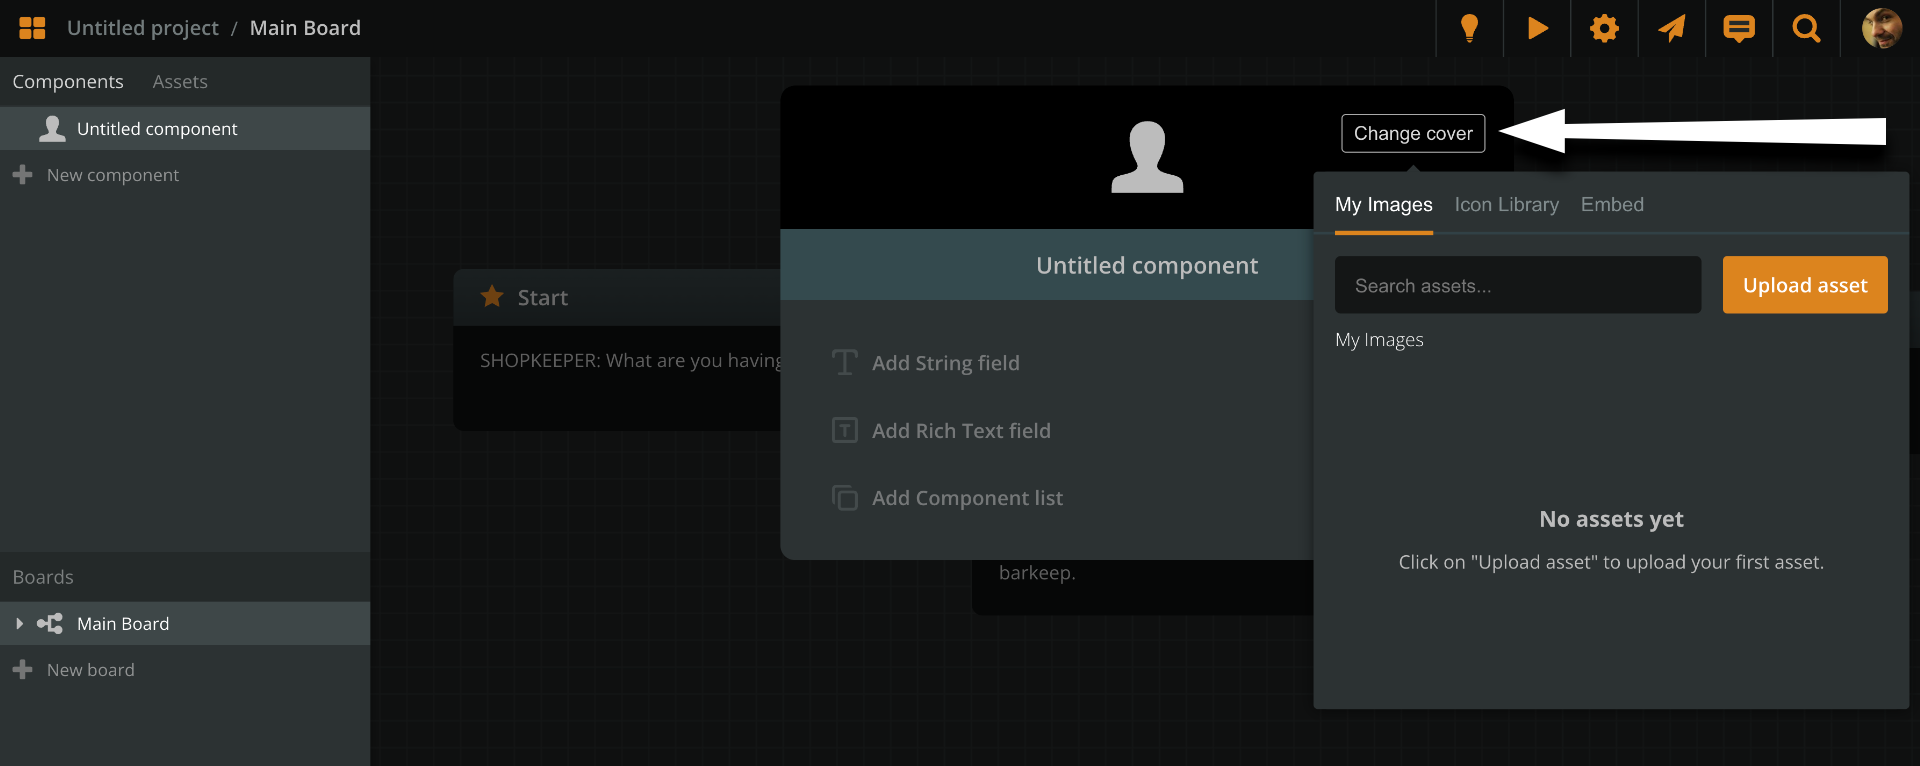 Arcweave screenshot: component editor with arrow pointing at the Change cover button.